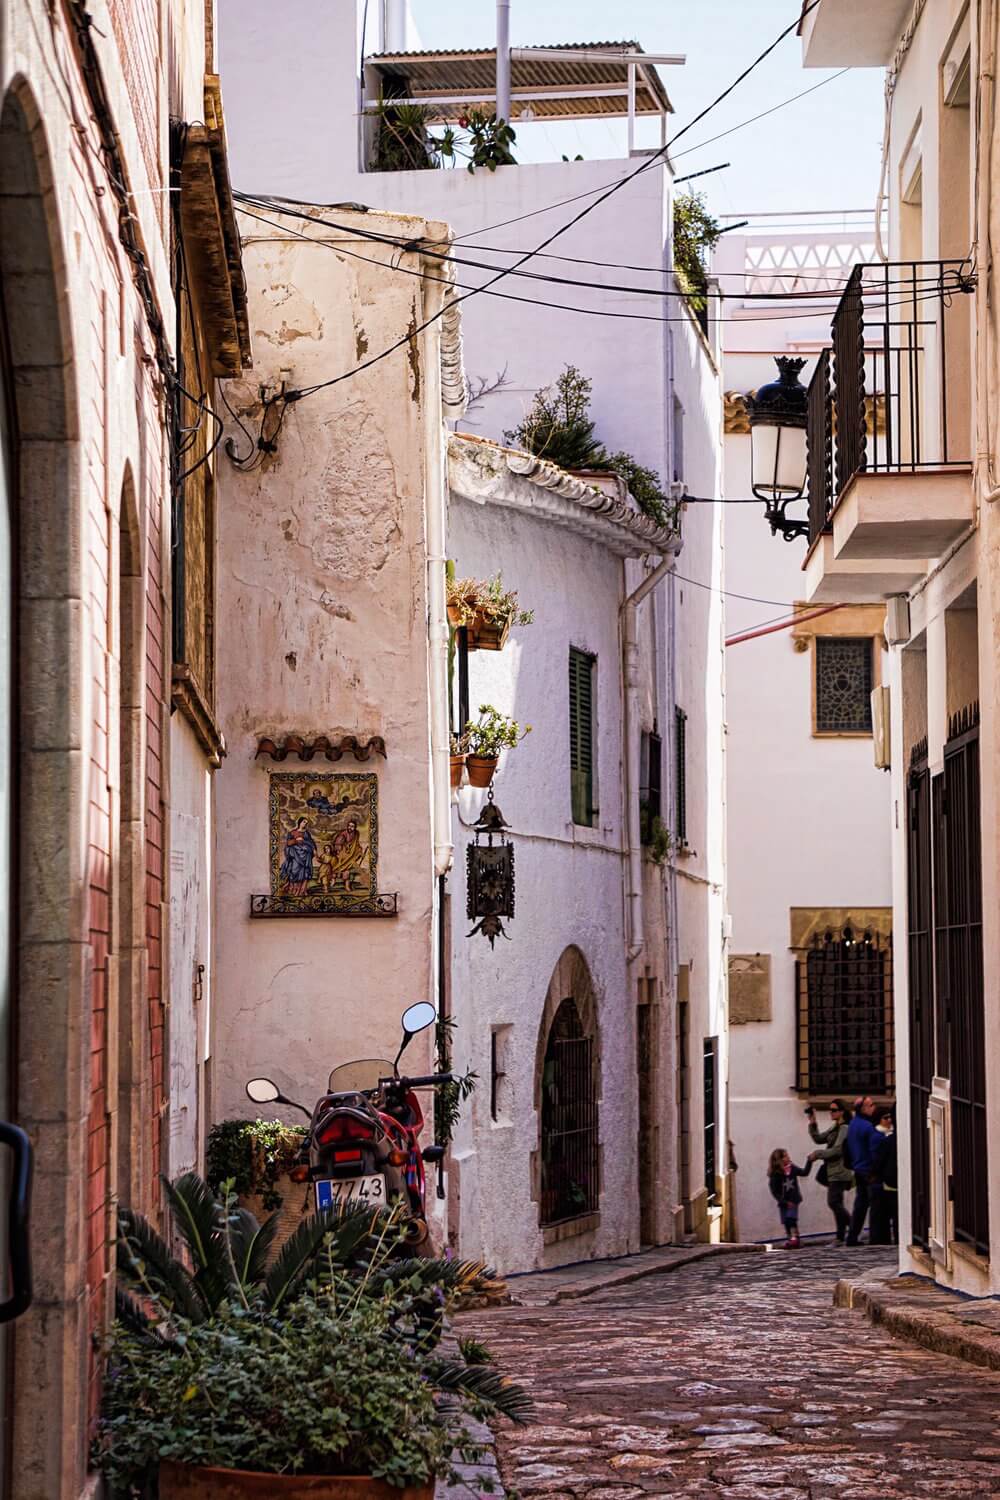 What to do in Sitges: wander a narrow medieval street with whitewashed buildings